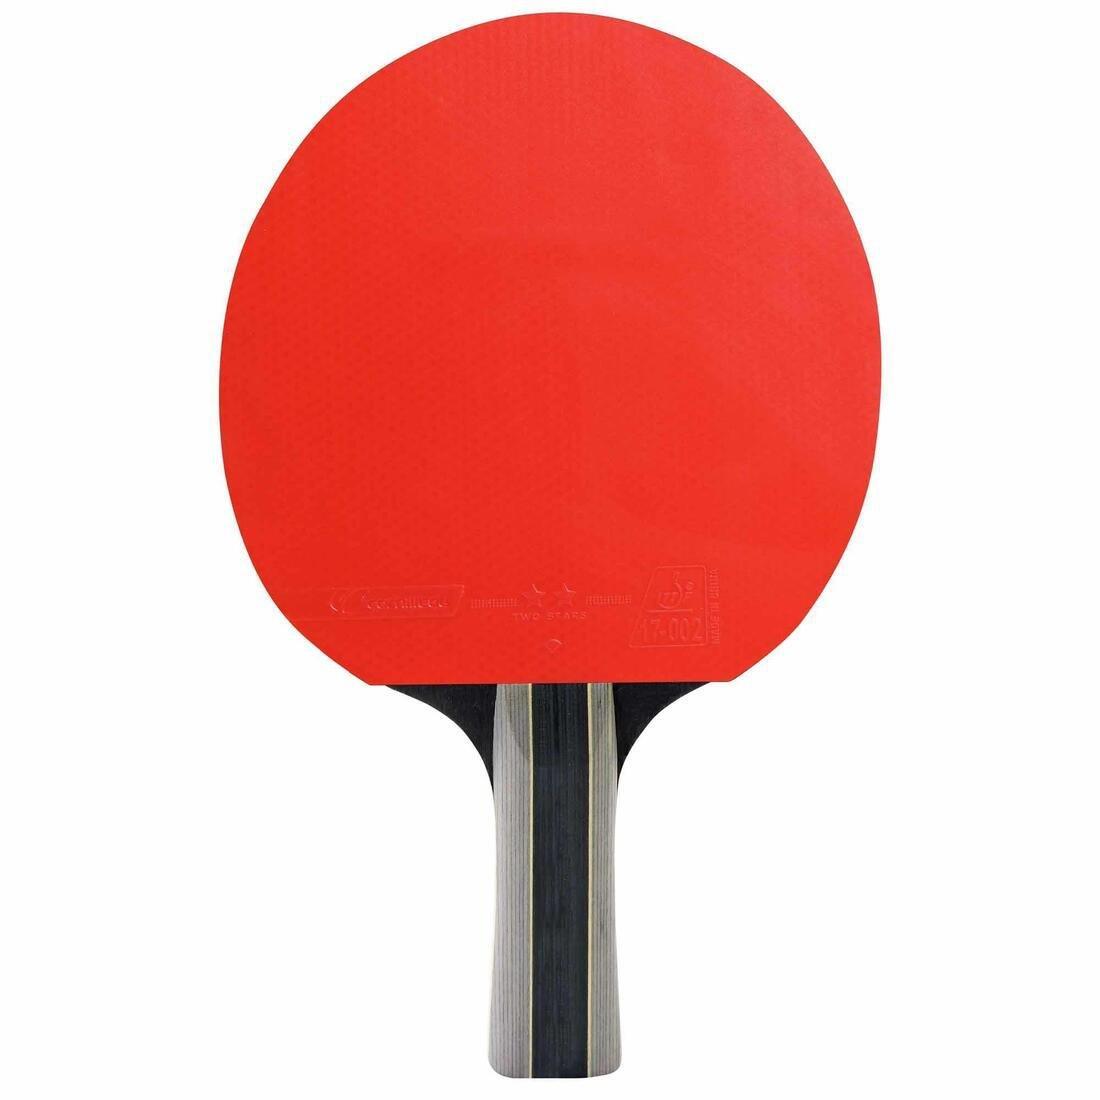 CORNILLEAU - Free Table Tennis Bats And 3 Balls, Set Of 2